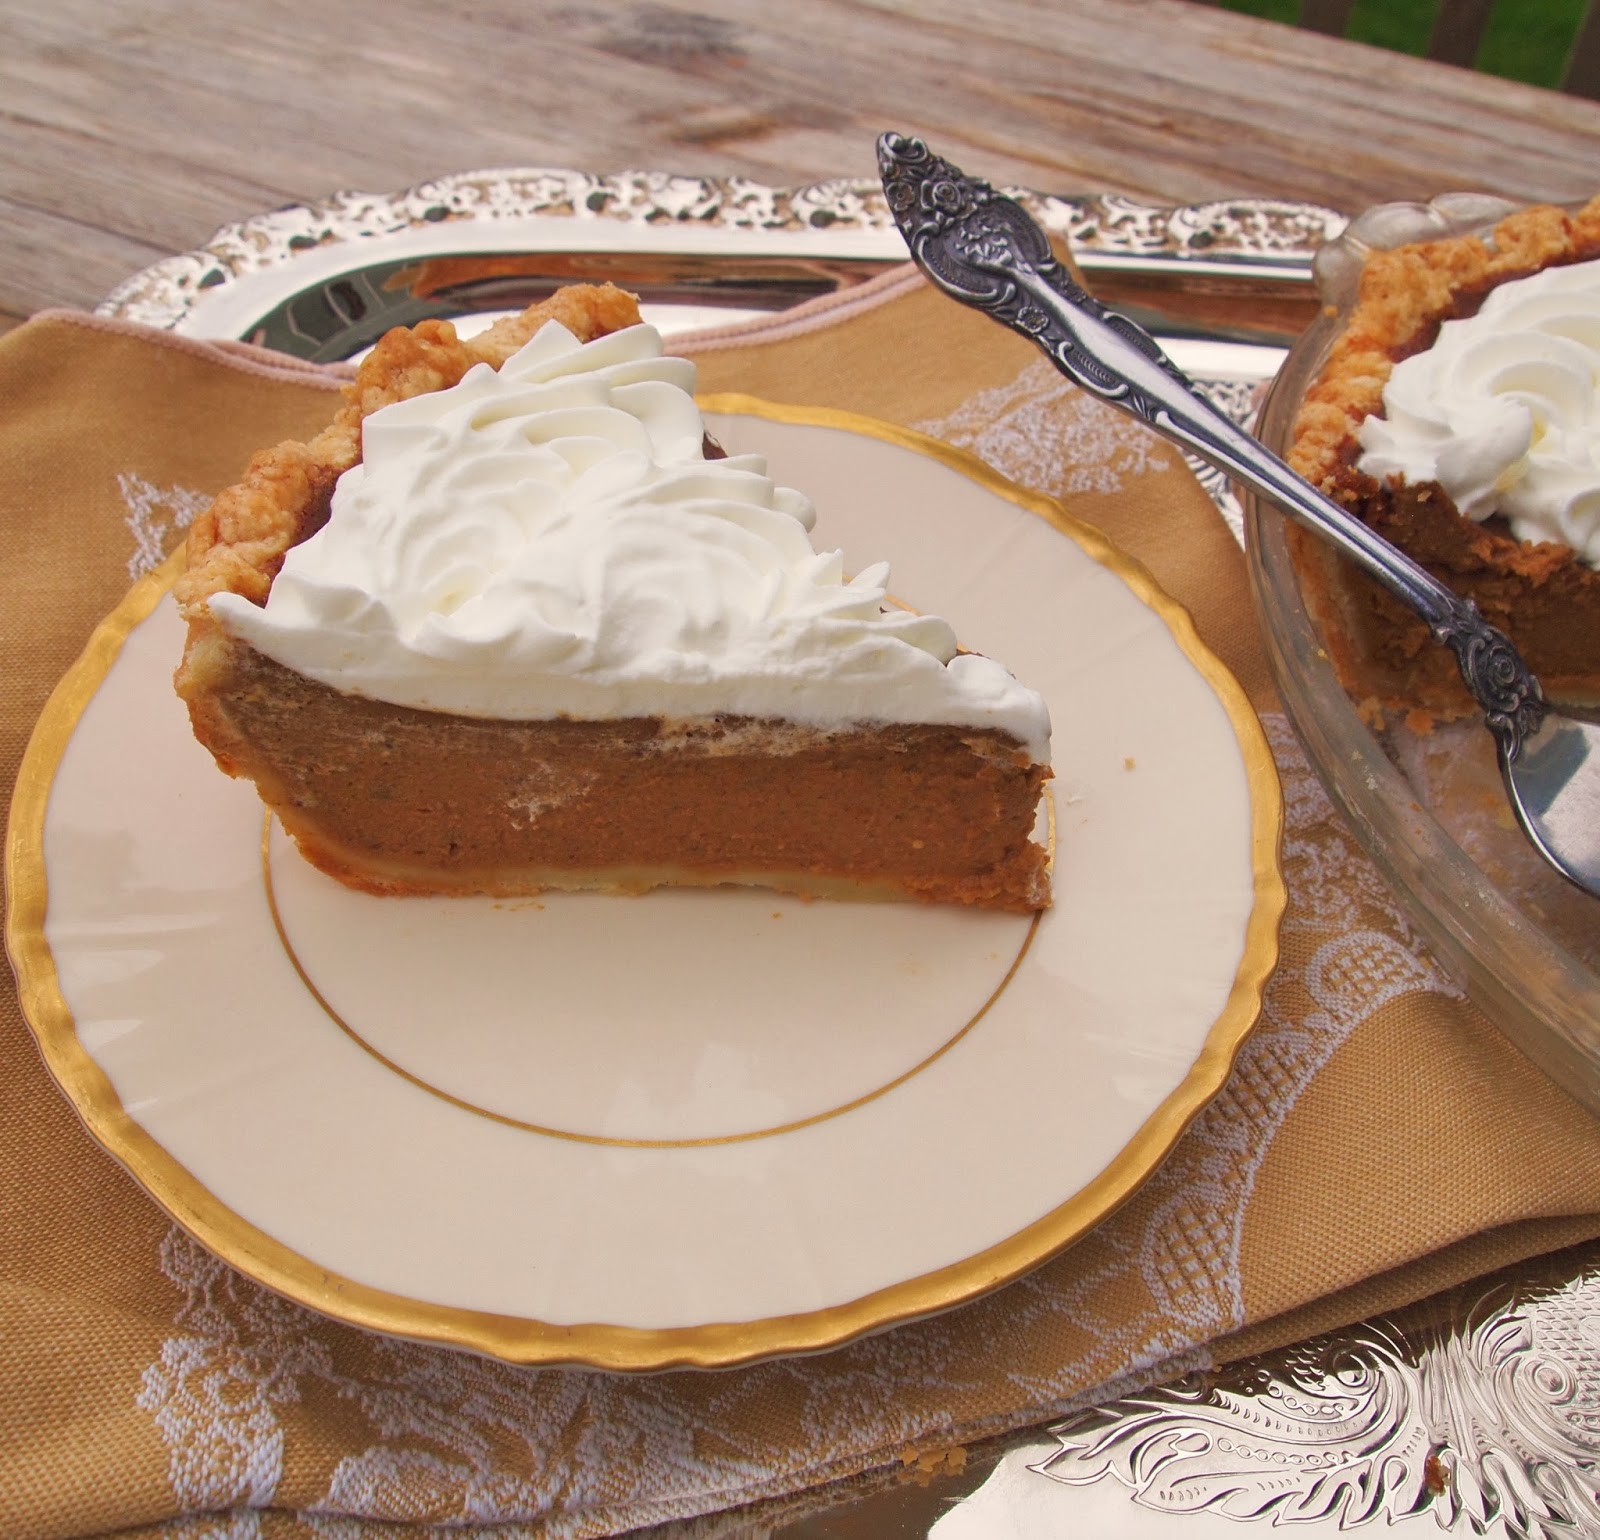 Pumpkin Pie with Cinnamon Crunch and BourbonMaple Whipped Cream